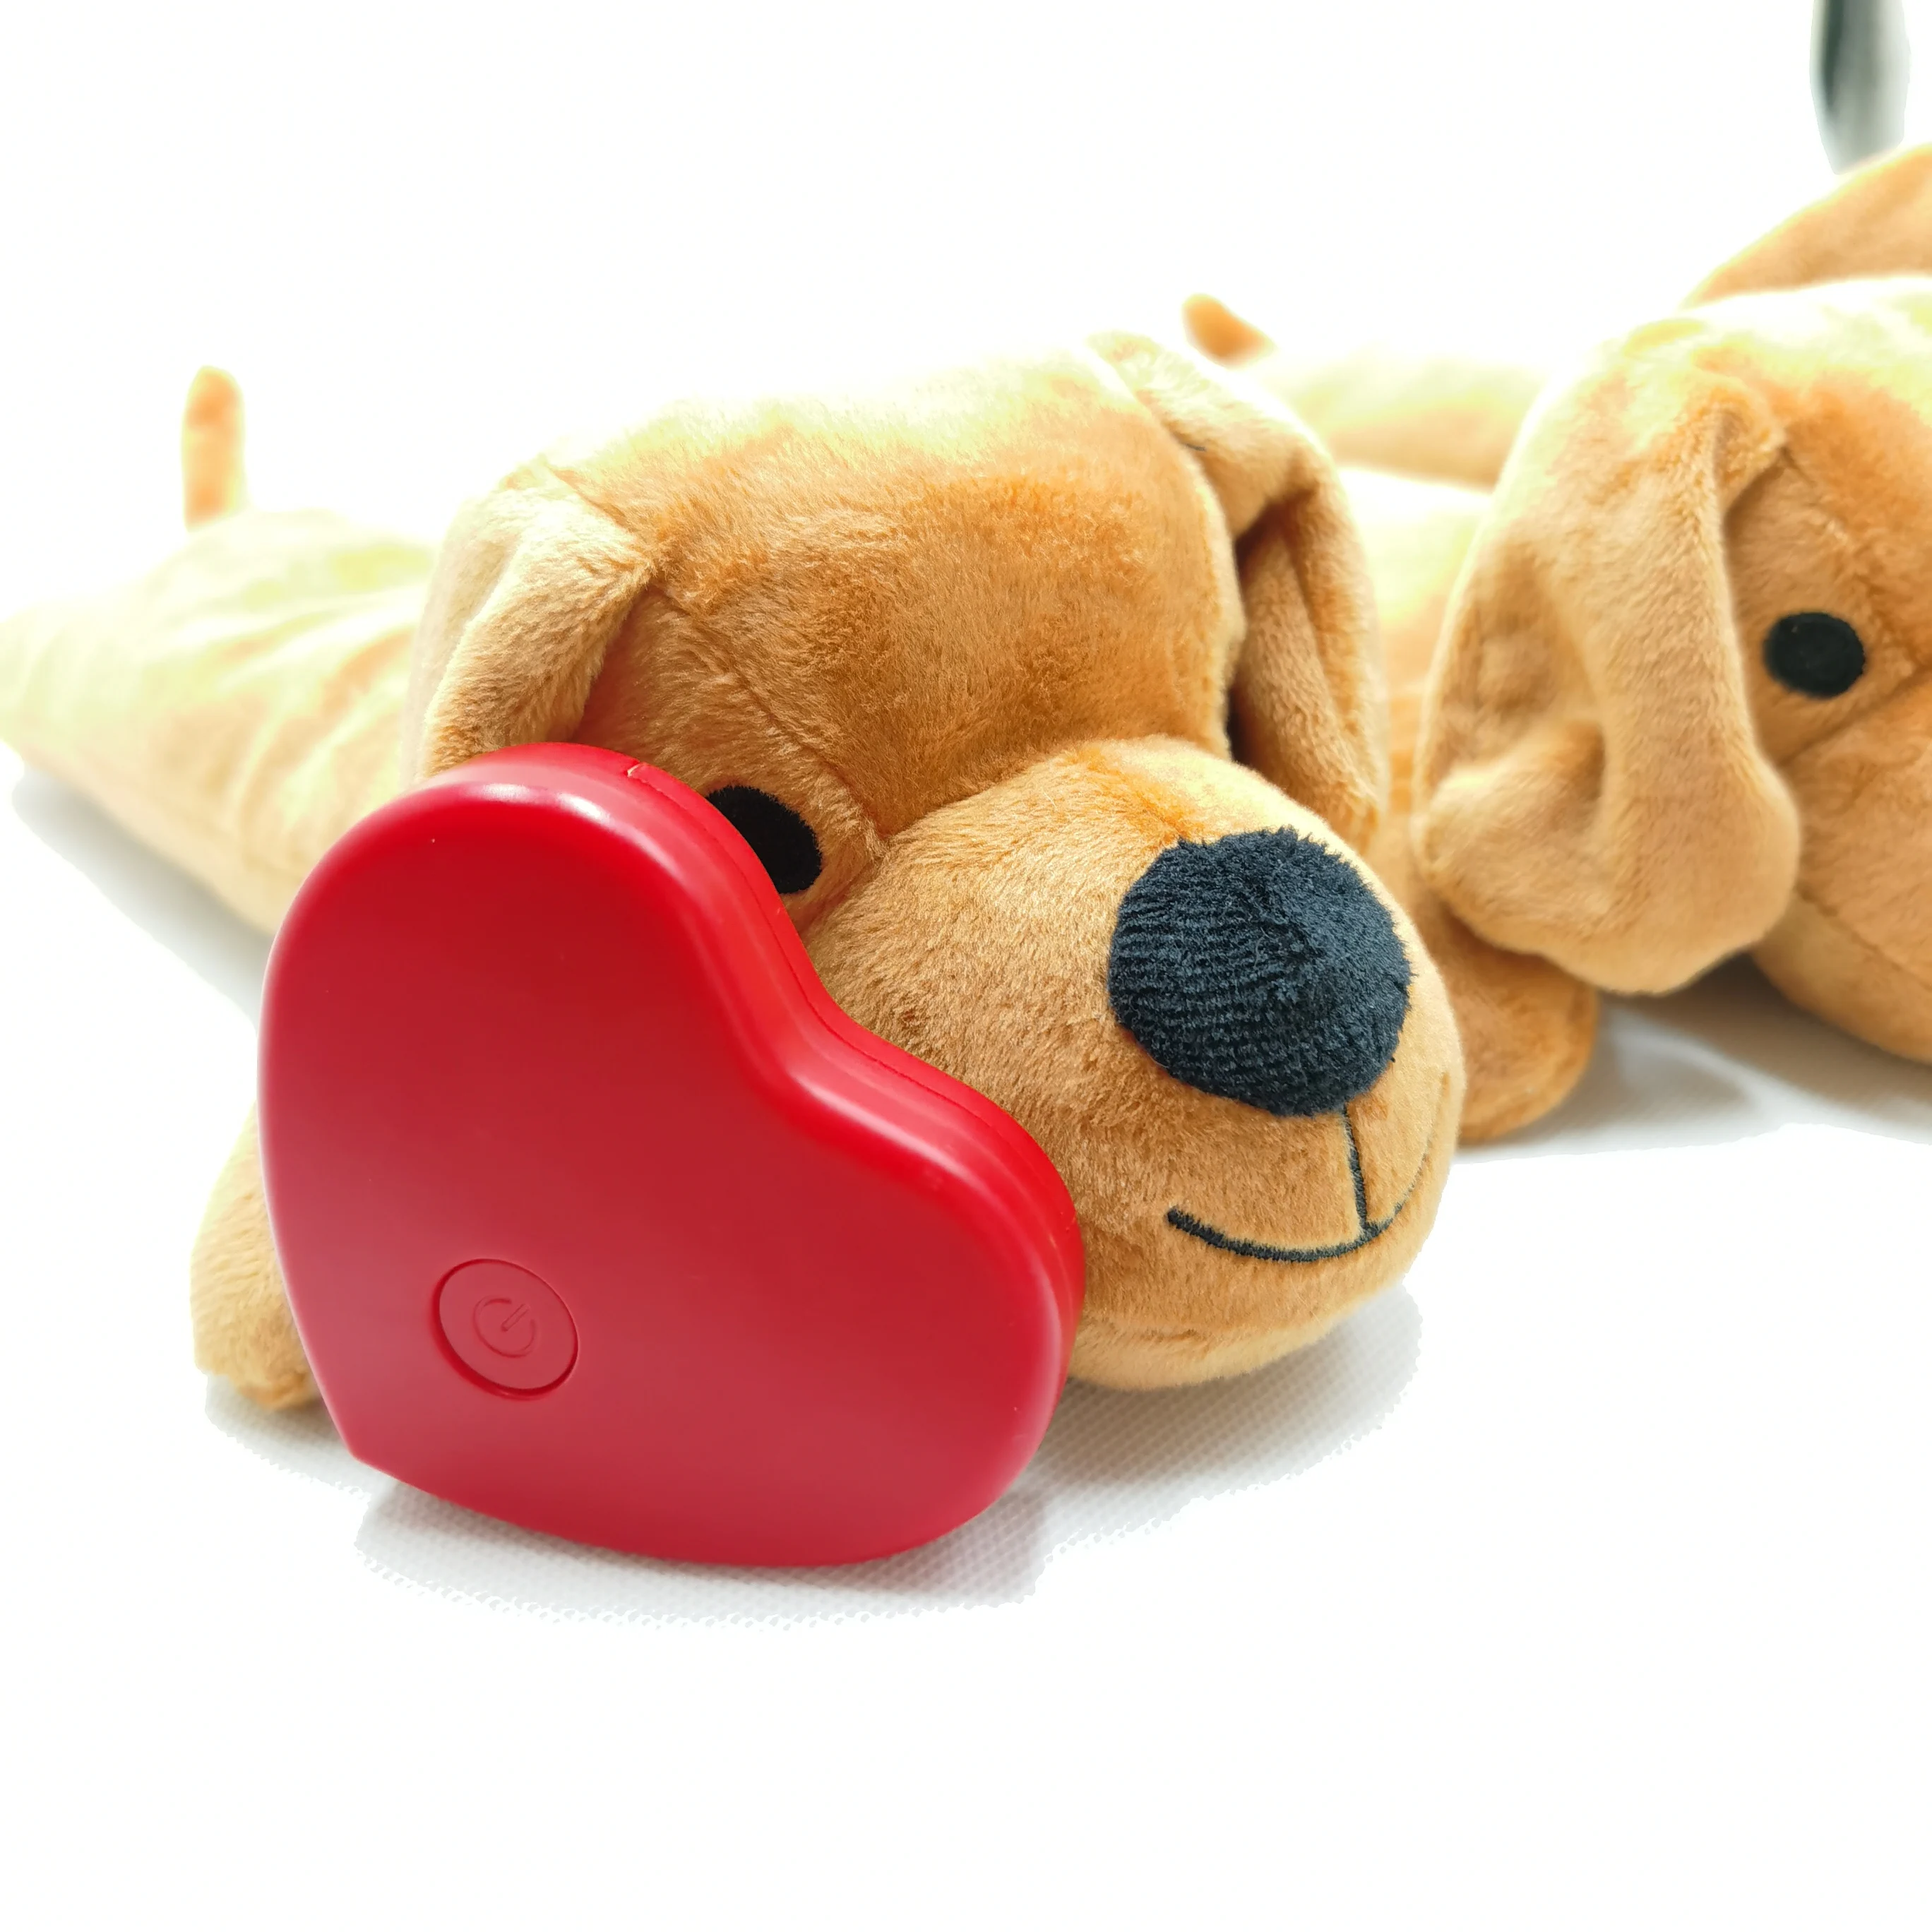 Pet Fit For Life Heartbeat Dog Toy with Heat for Calming Anxiety - Puppy  Sleep Aid with USB Rechargeable Heart Beat Simulator and Reusable